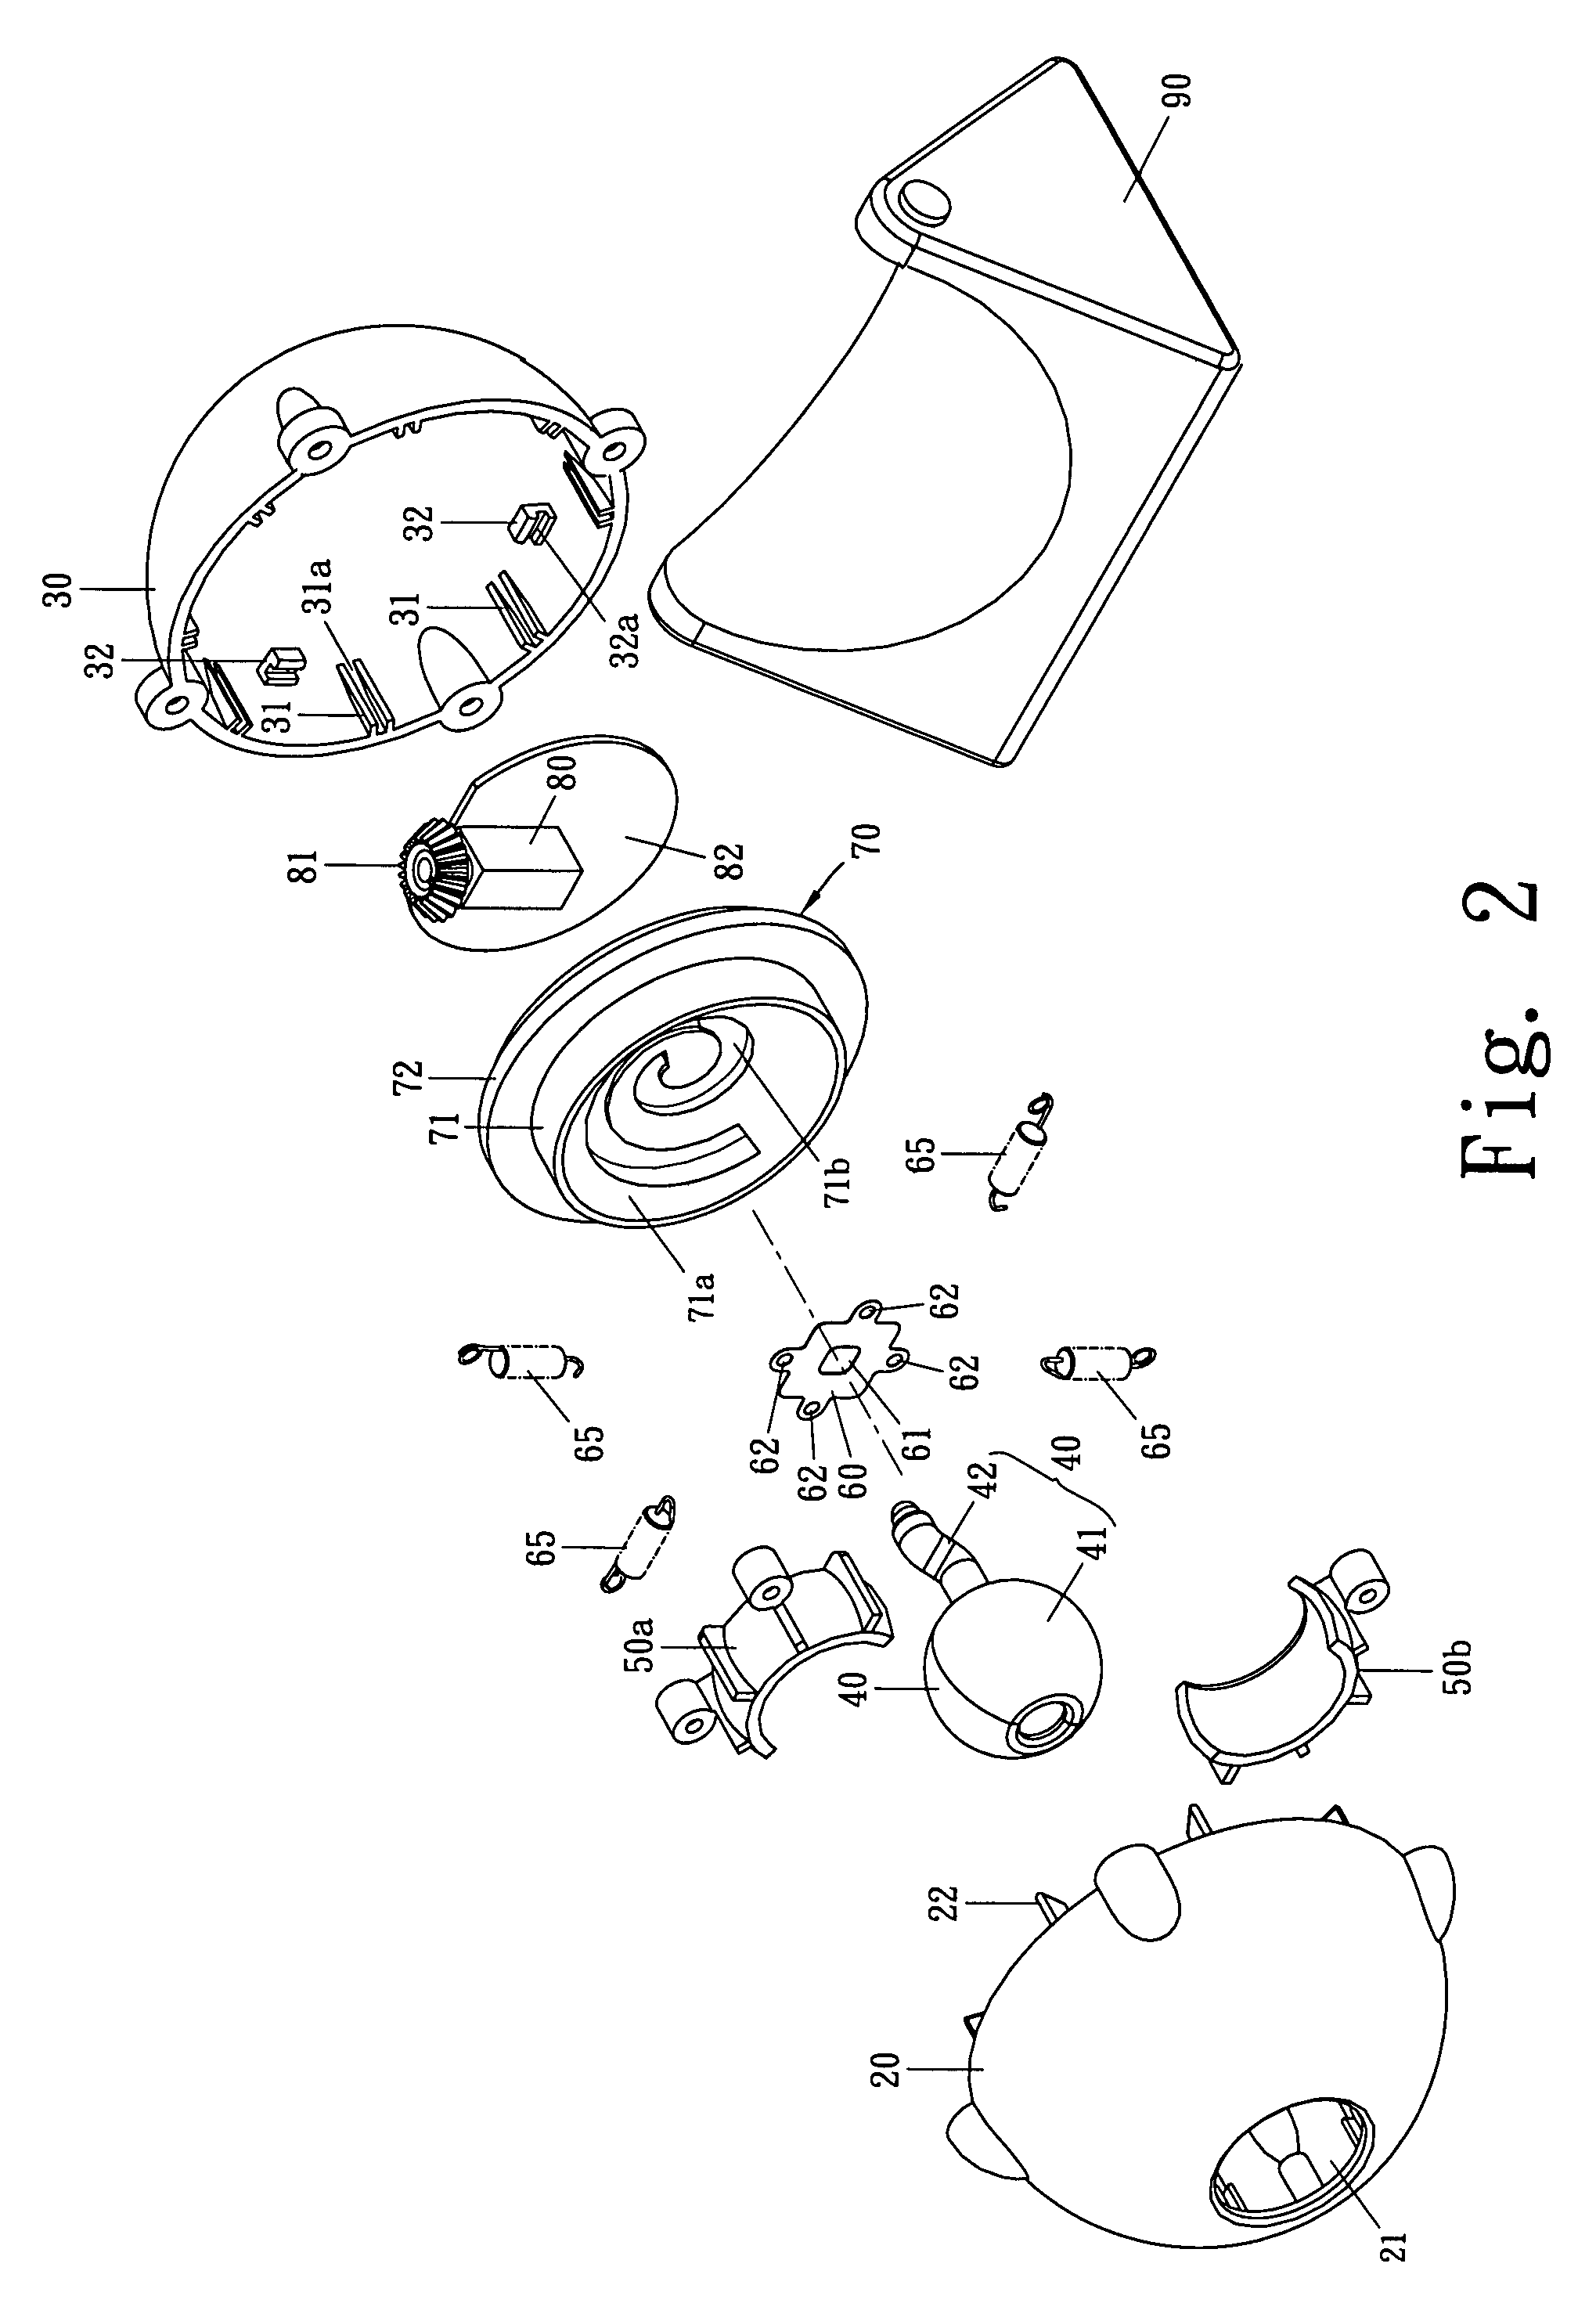 Rotatable camera that moves a camera lens unit in a panning or tilting motion by a single motor